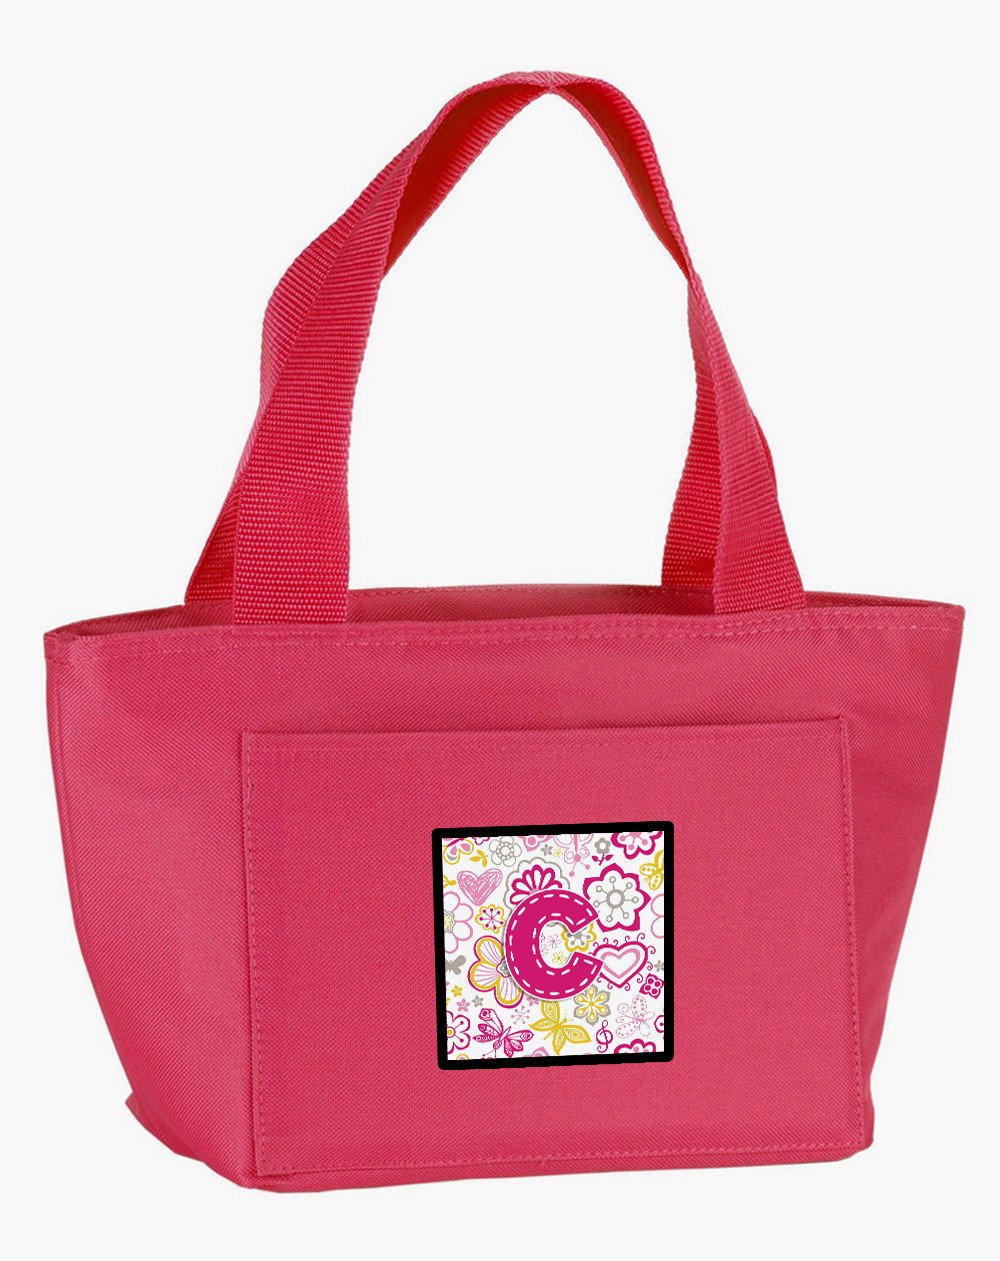 Letter C Flowers and Butterflies Pink Lunch Bag CJ2005-CPK-8808 by Caroline's Treasures